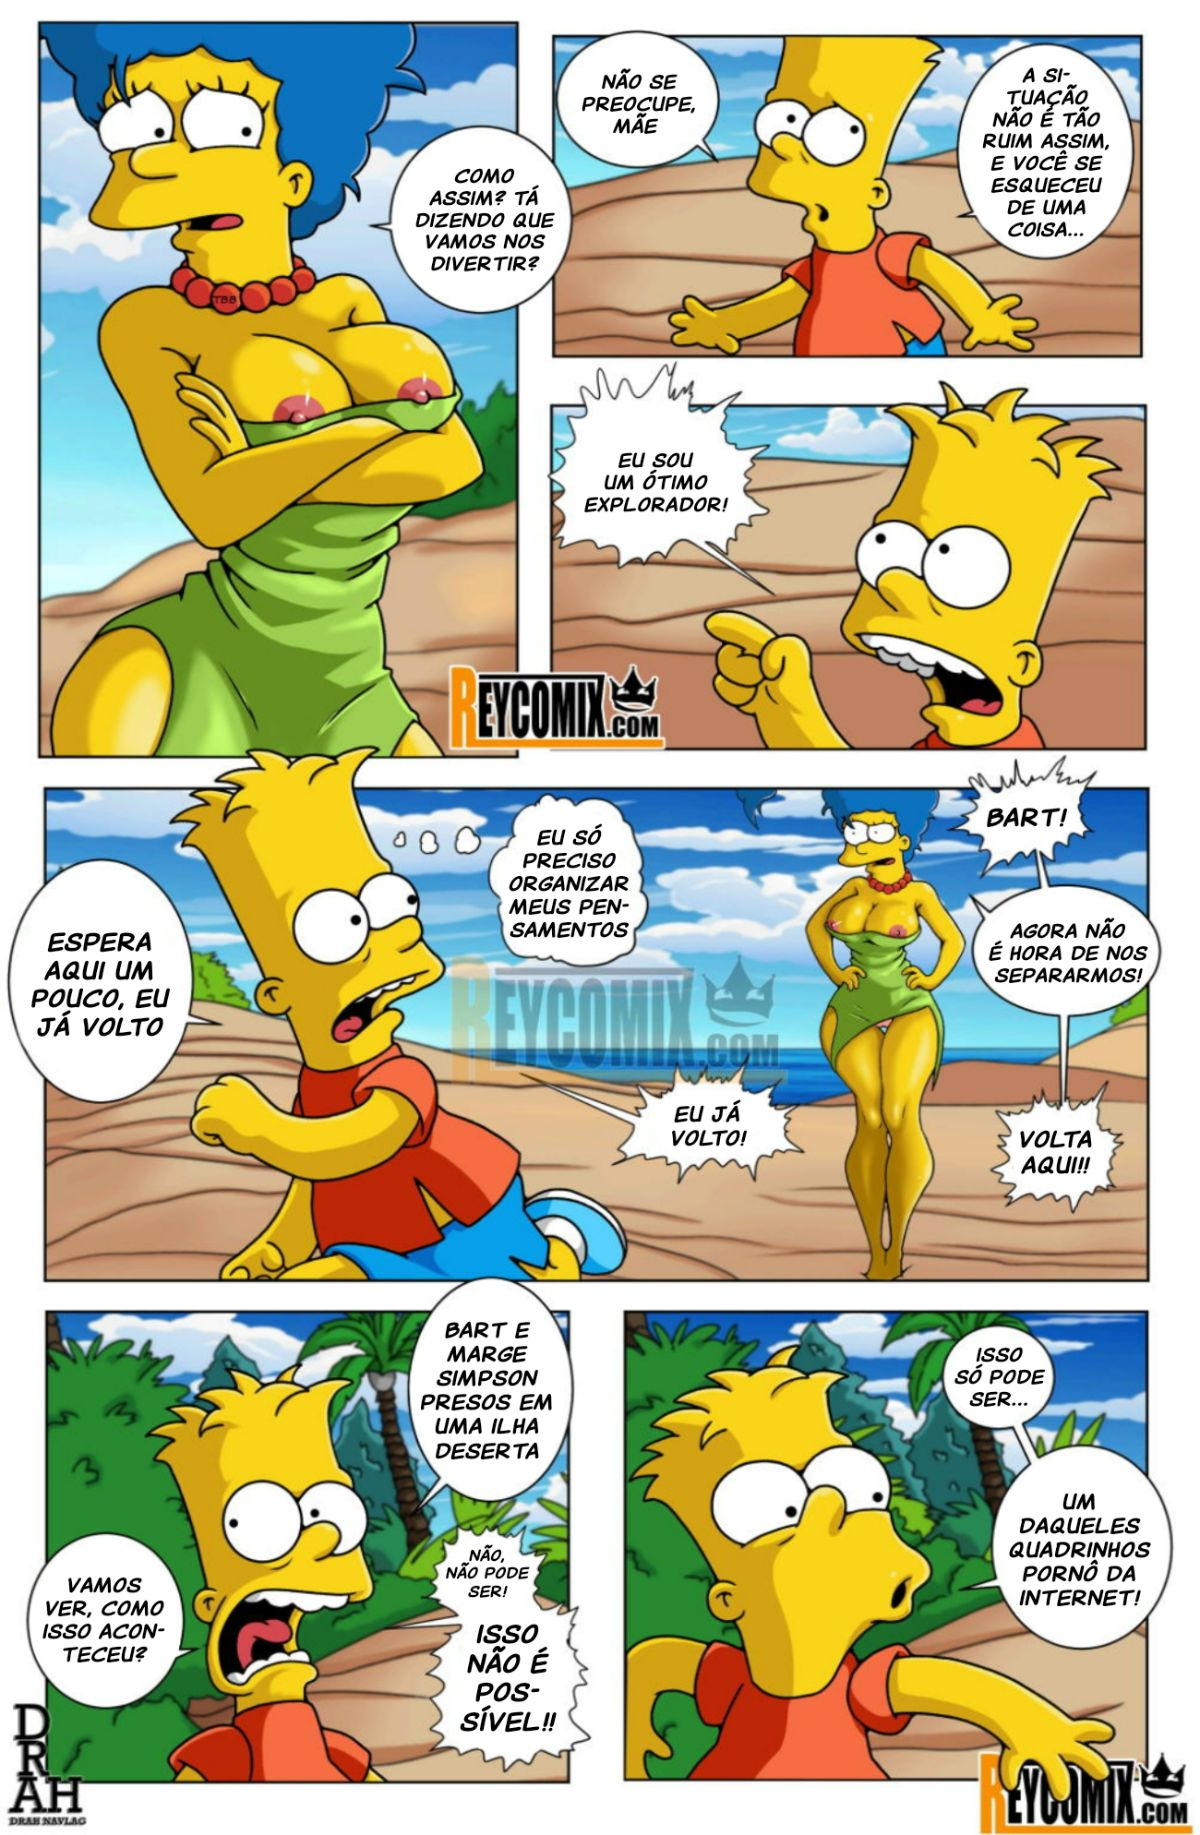 The Simpsons Paradise Hentai pt-br 06